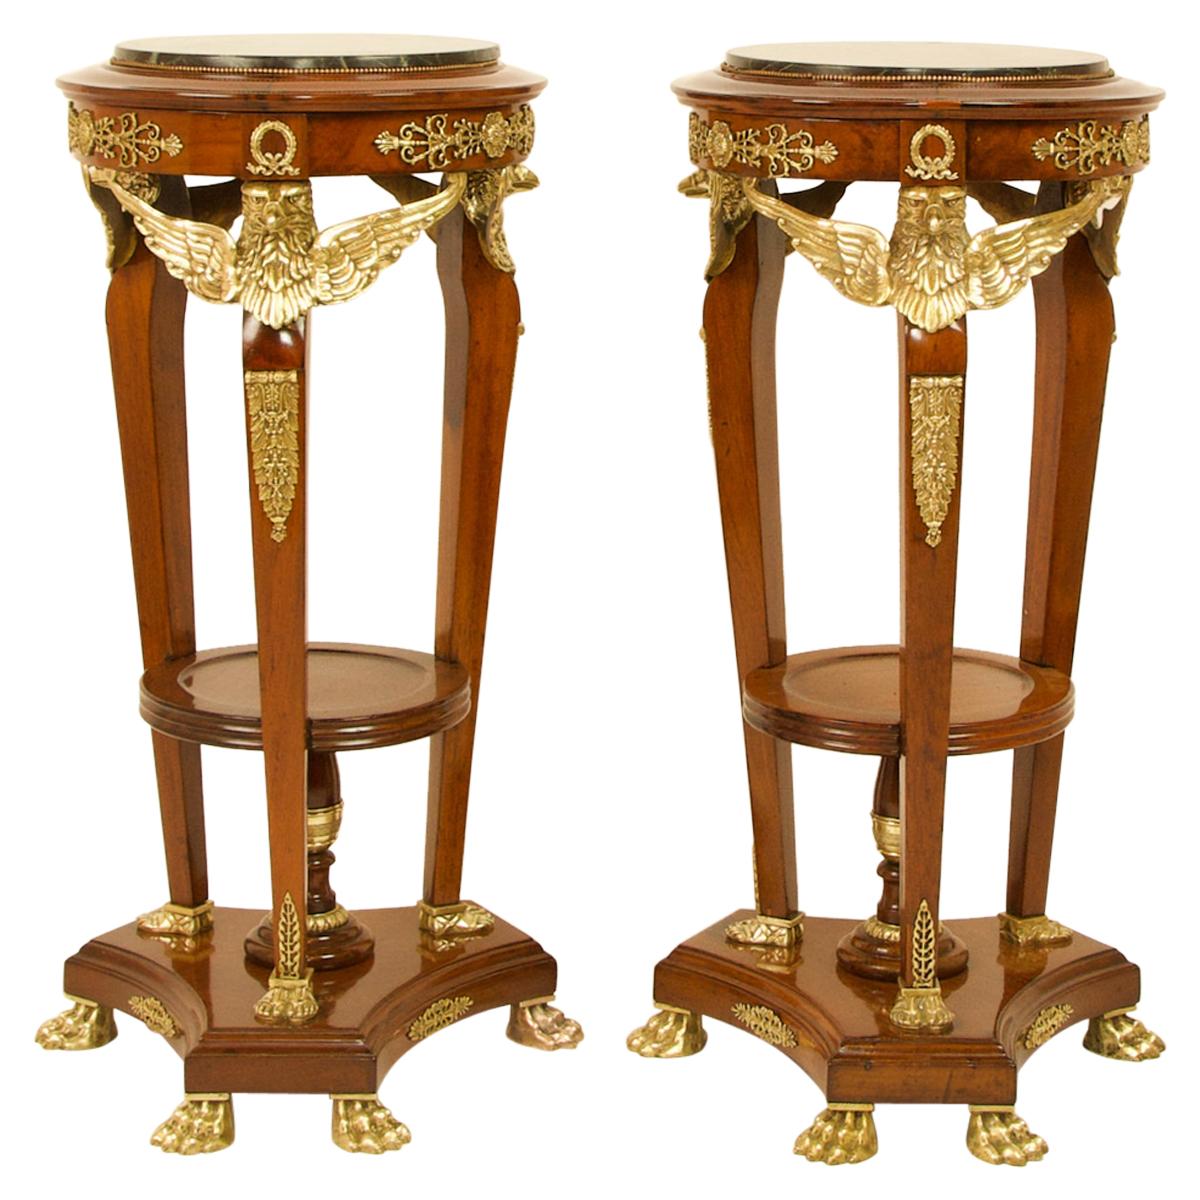 Pair of 19th Century French Empire Mahogany Bronze Eagle Heads Pedestals/Stands